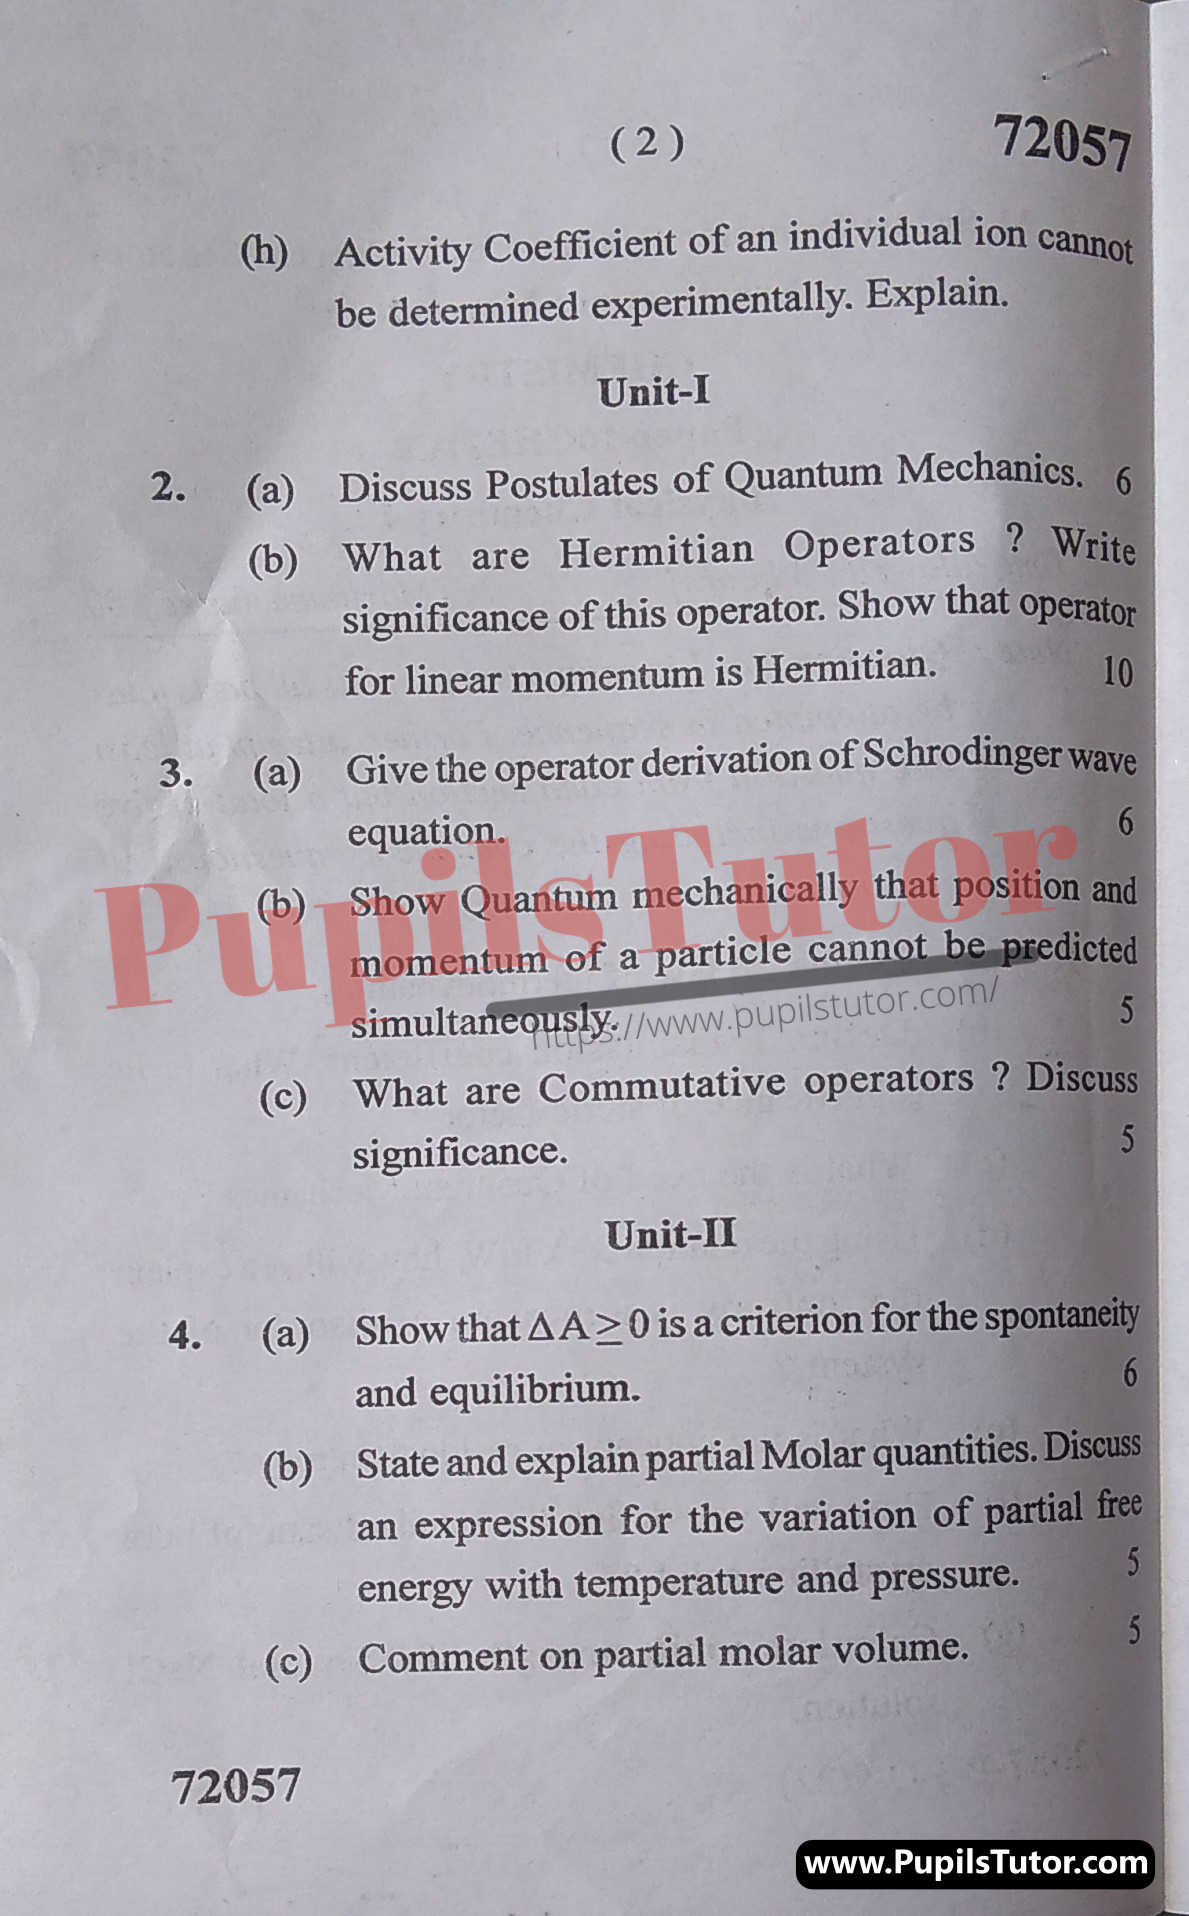 M.D. University M.Sc. [Chemistry] Physical Chemistry-I First Semester Important Question Answer And Solution - www.pupilstutor.com (Paper Page Number 2)